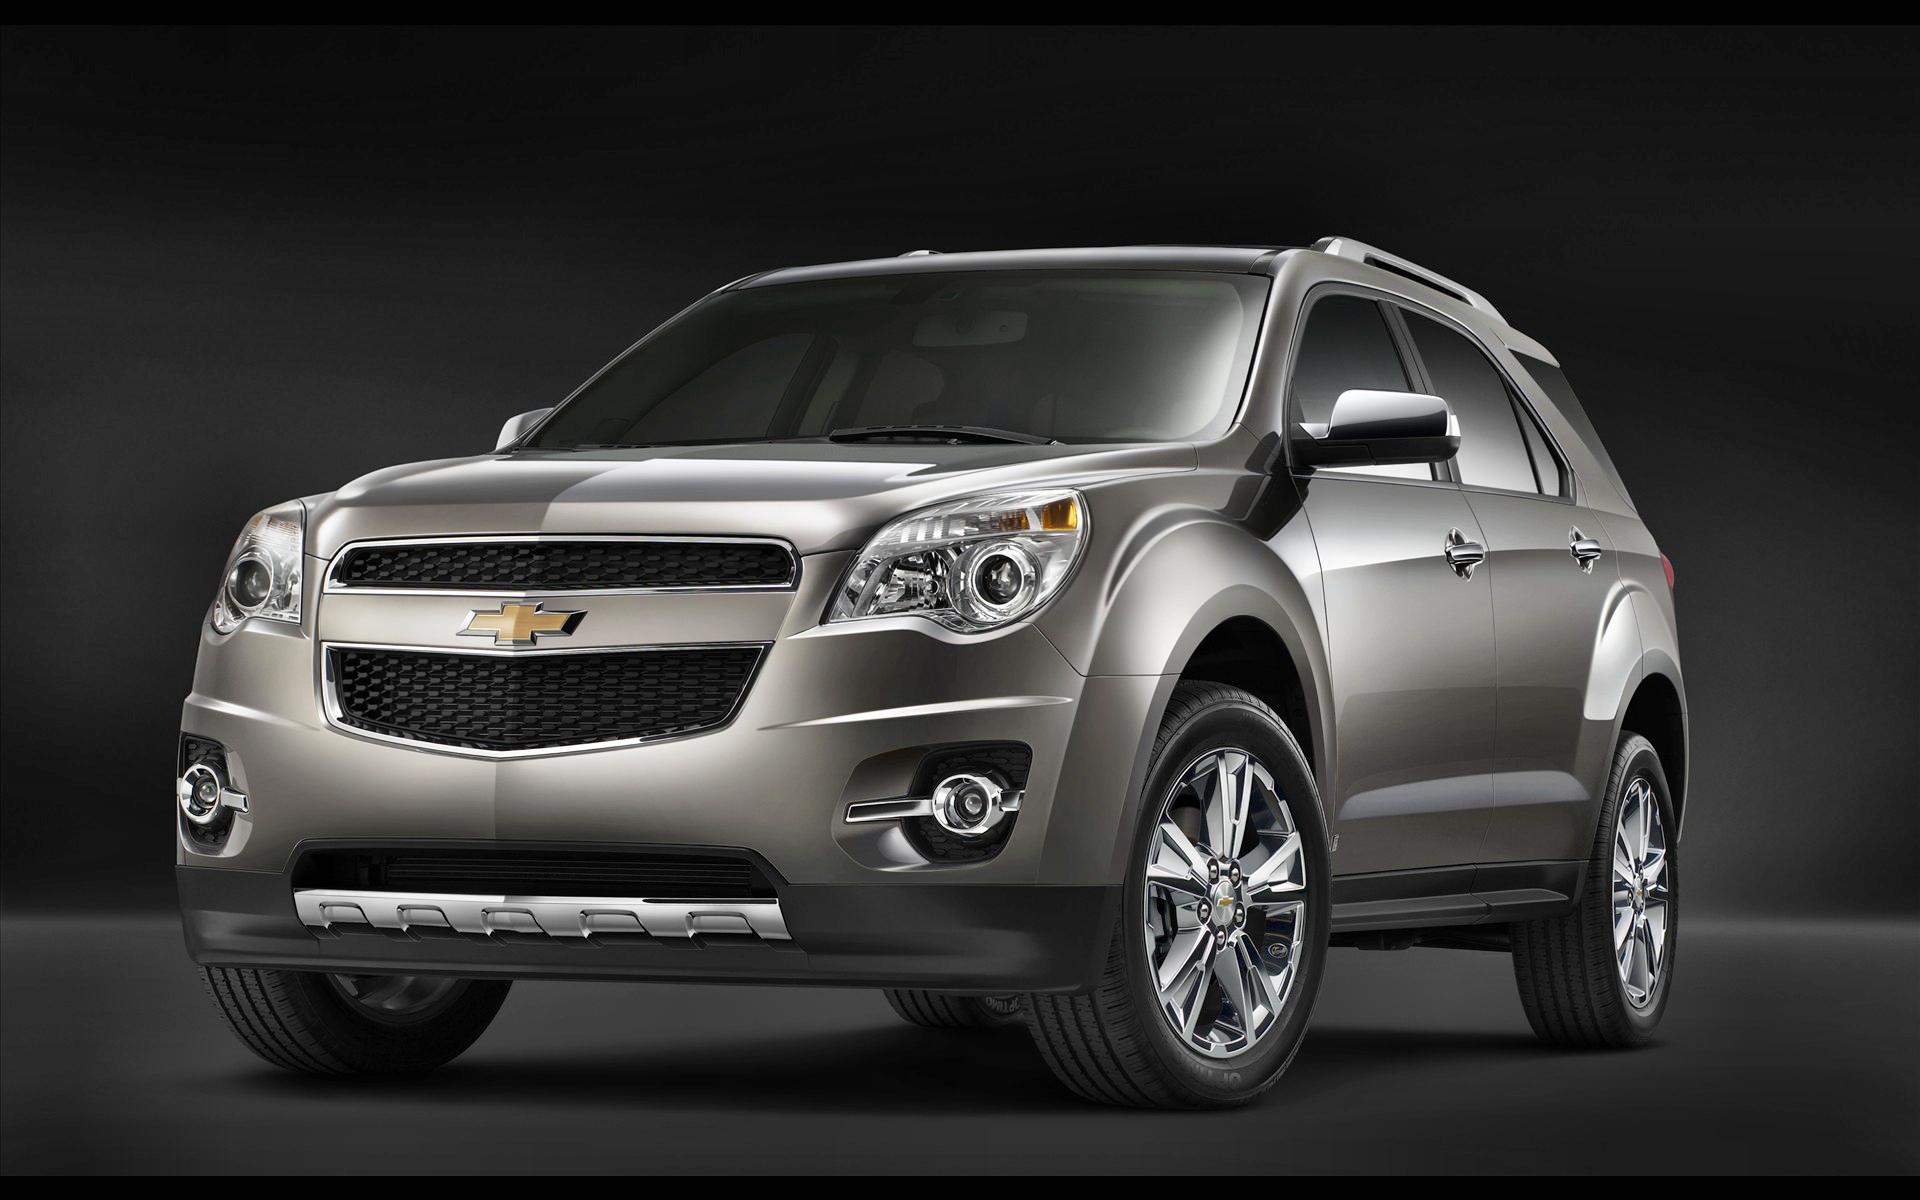 2009 chevy equinox for sale